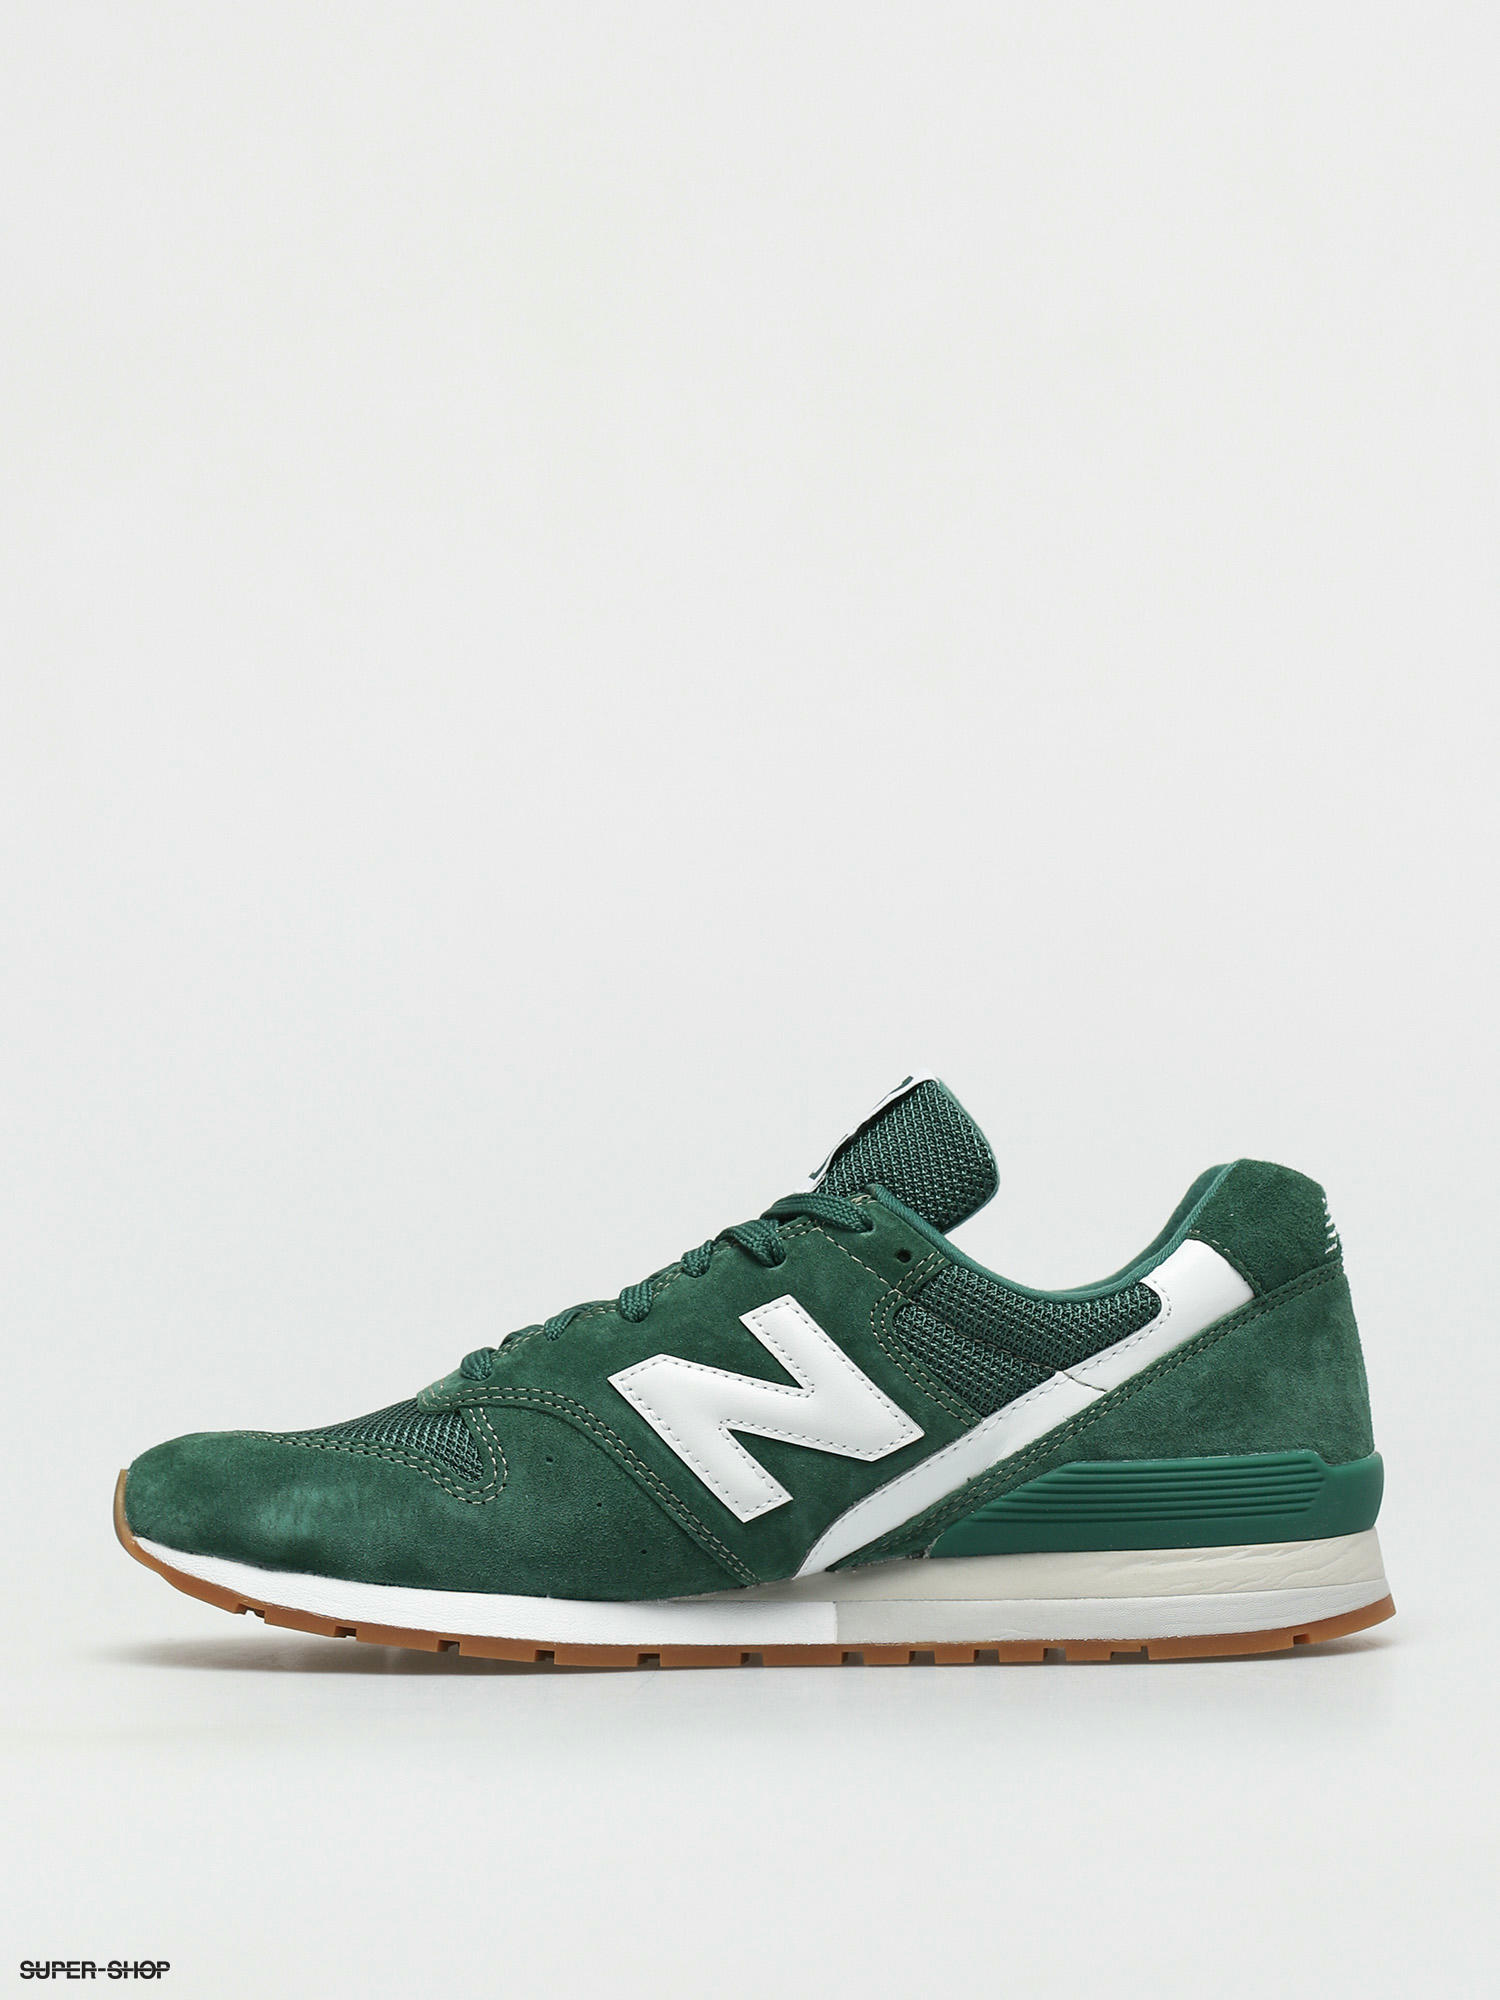 New Balance 996 Shoes (green/white)